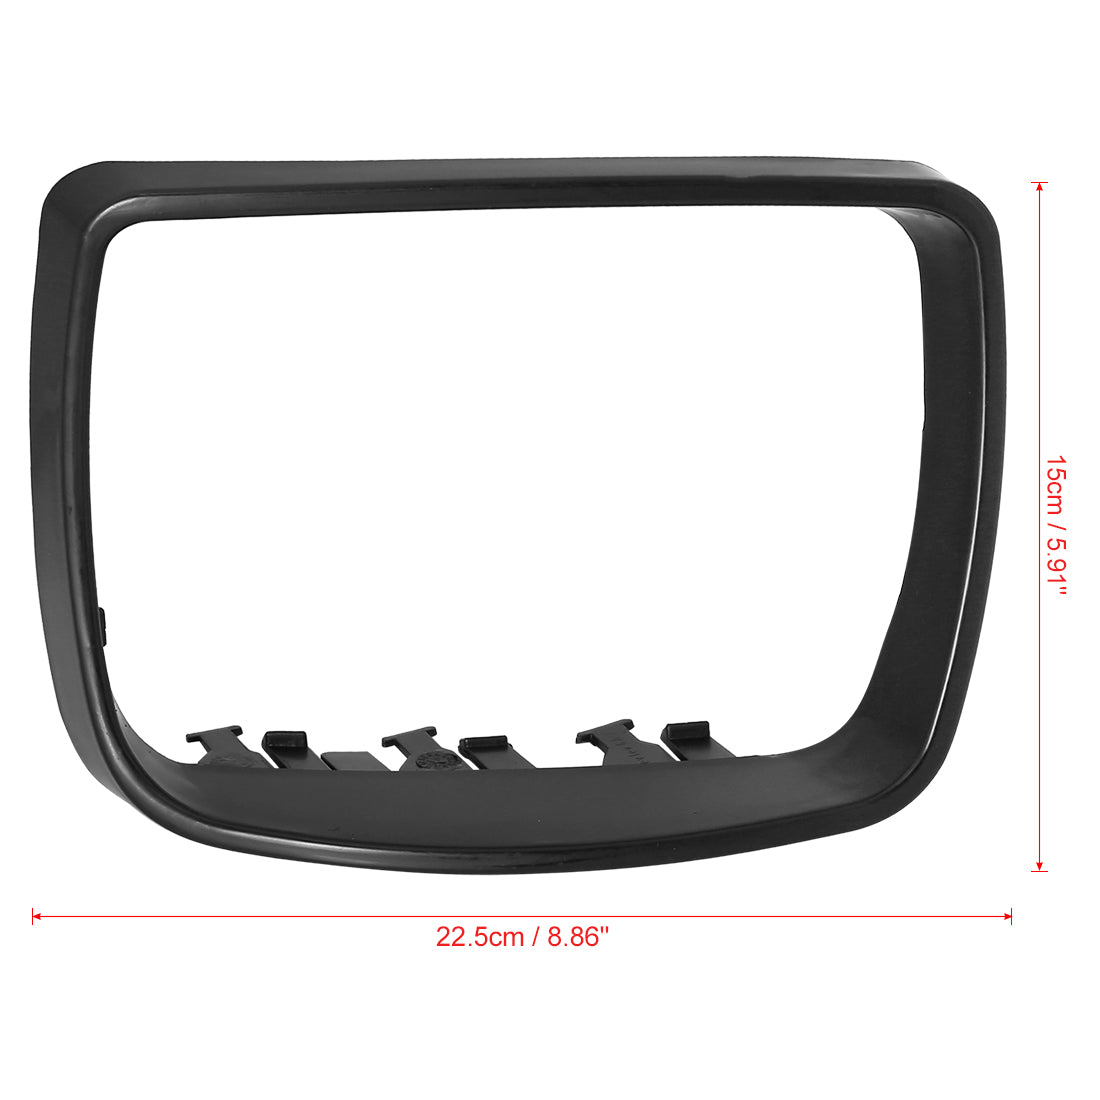 X AUTOHAUX Car Left Side Exterior Rear View Mirror Cover Housing Door Wing Mirror Cap Trim Ring 51168254903 Black for BMW E53 X5 2000-2006